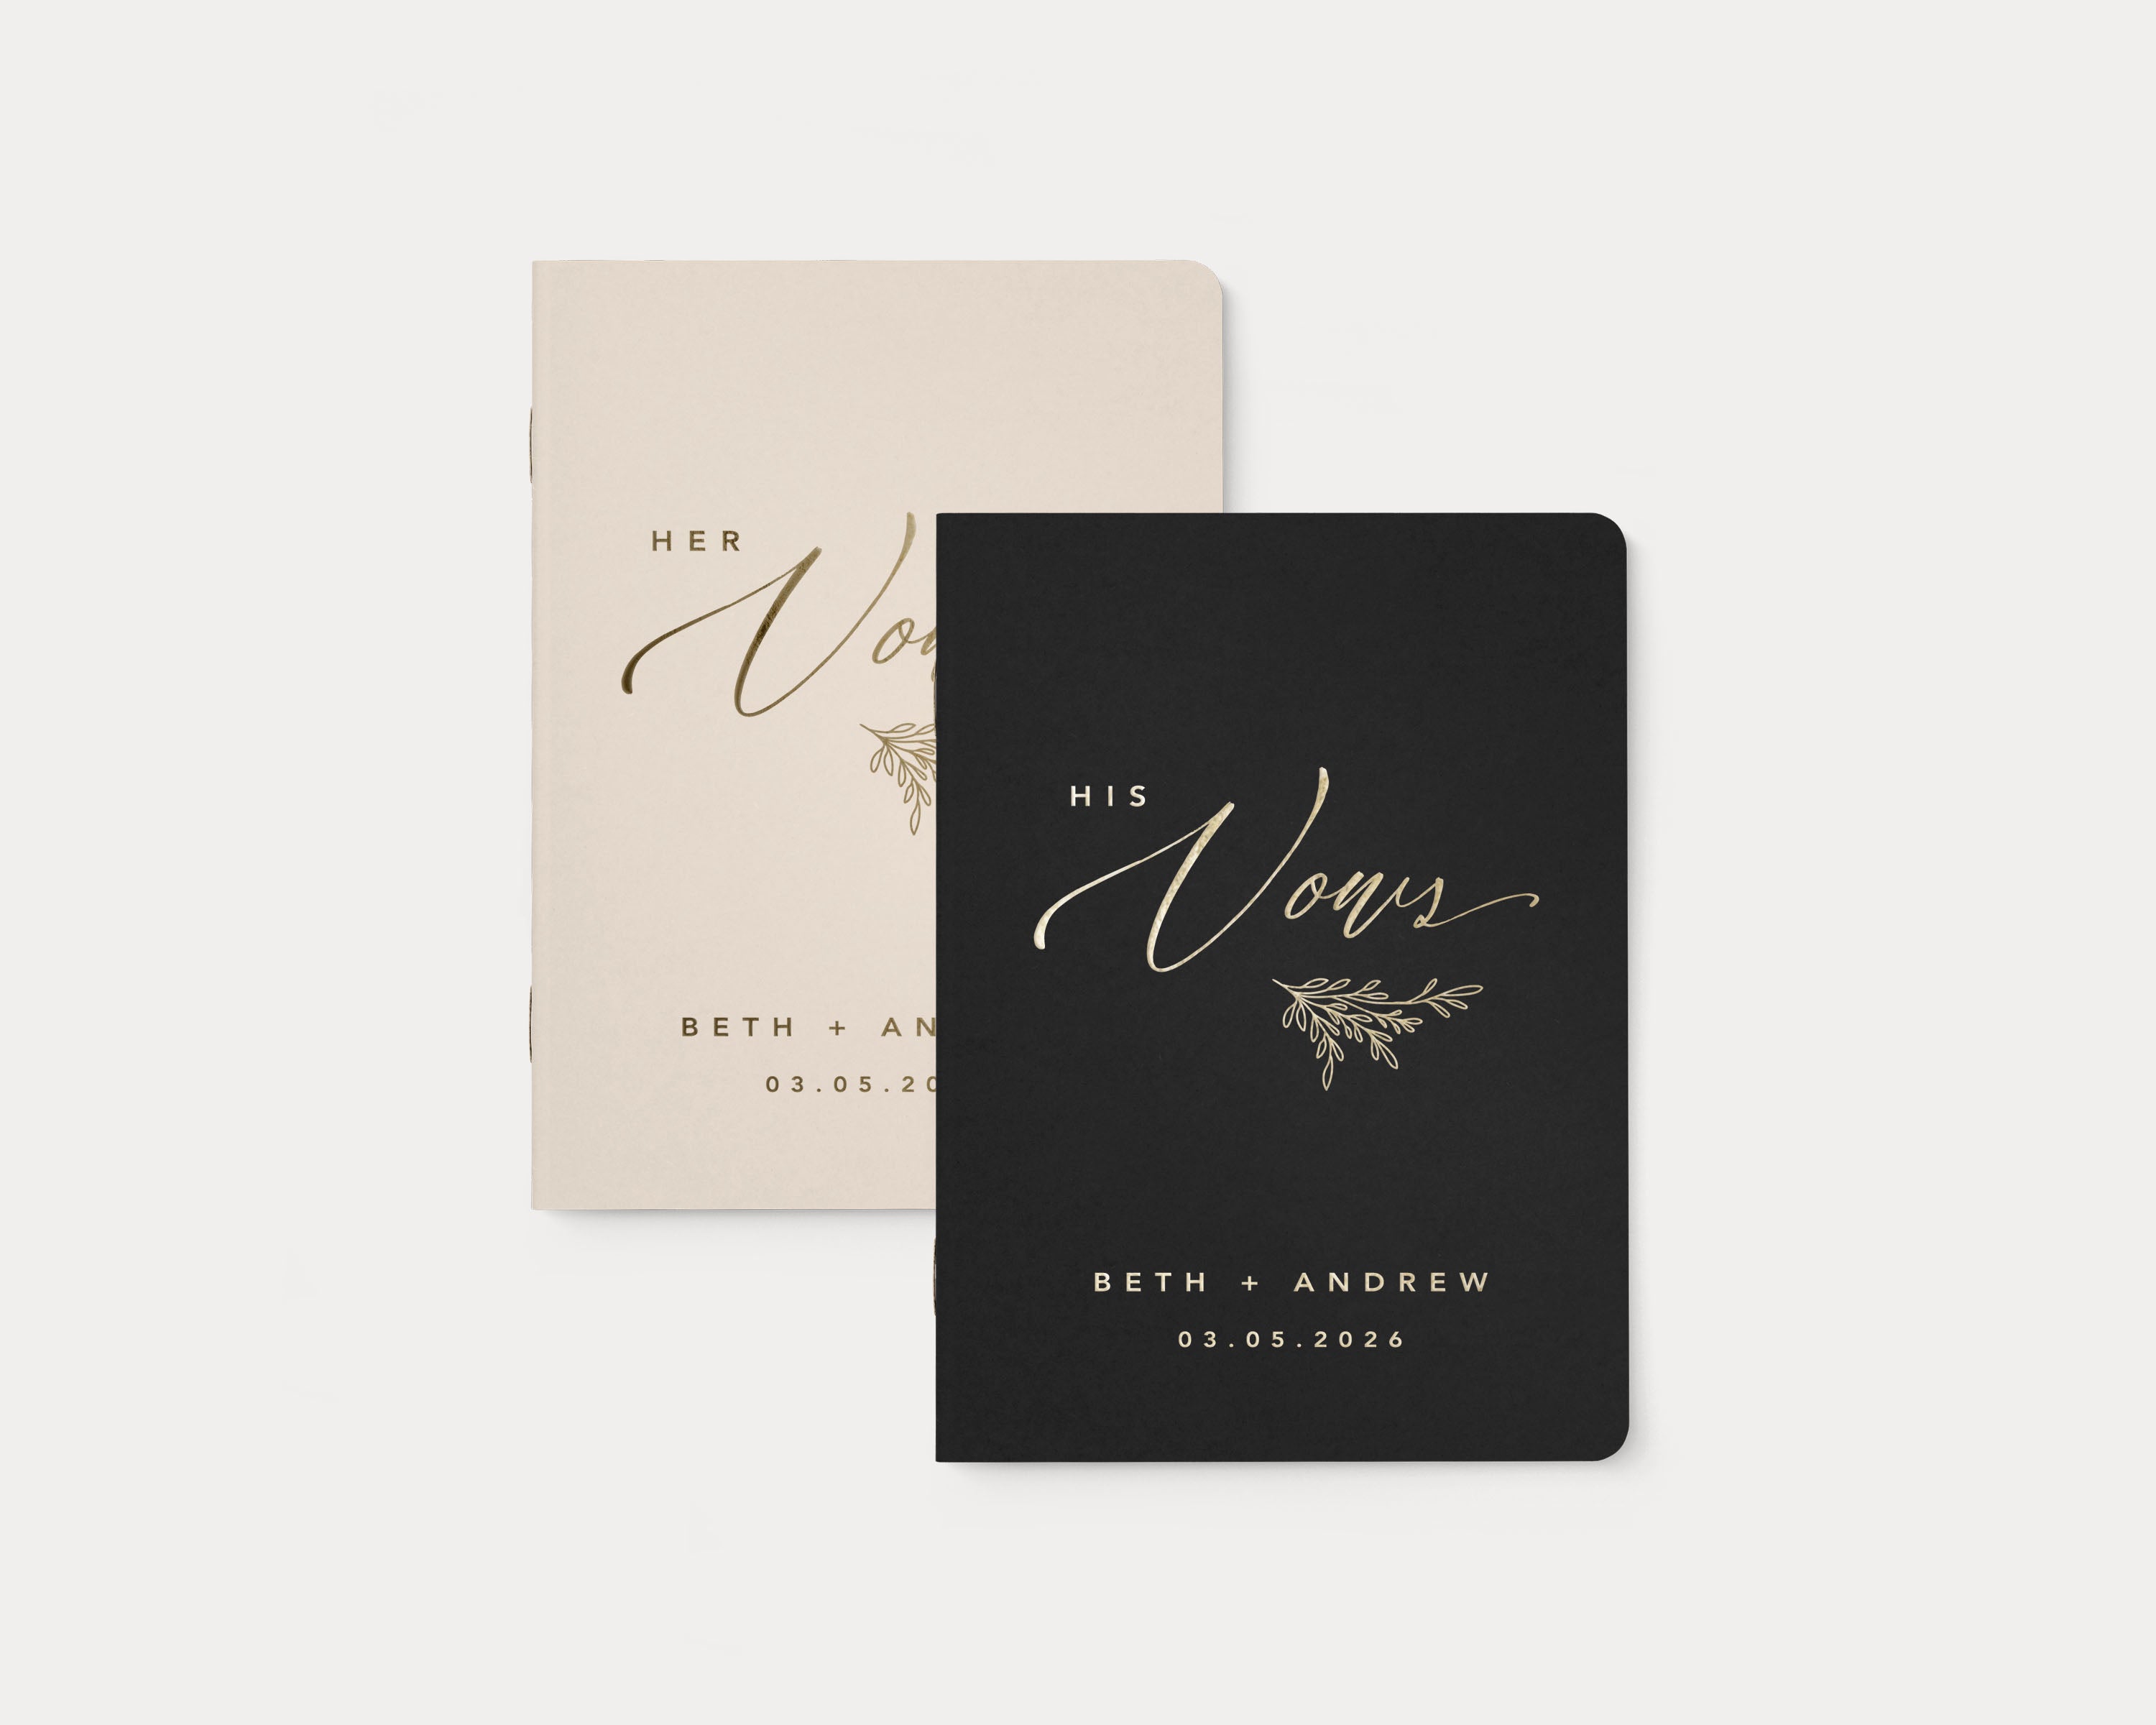 Almond and black wedding vow books with custom gold foil lettering.